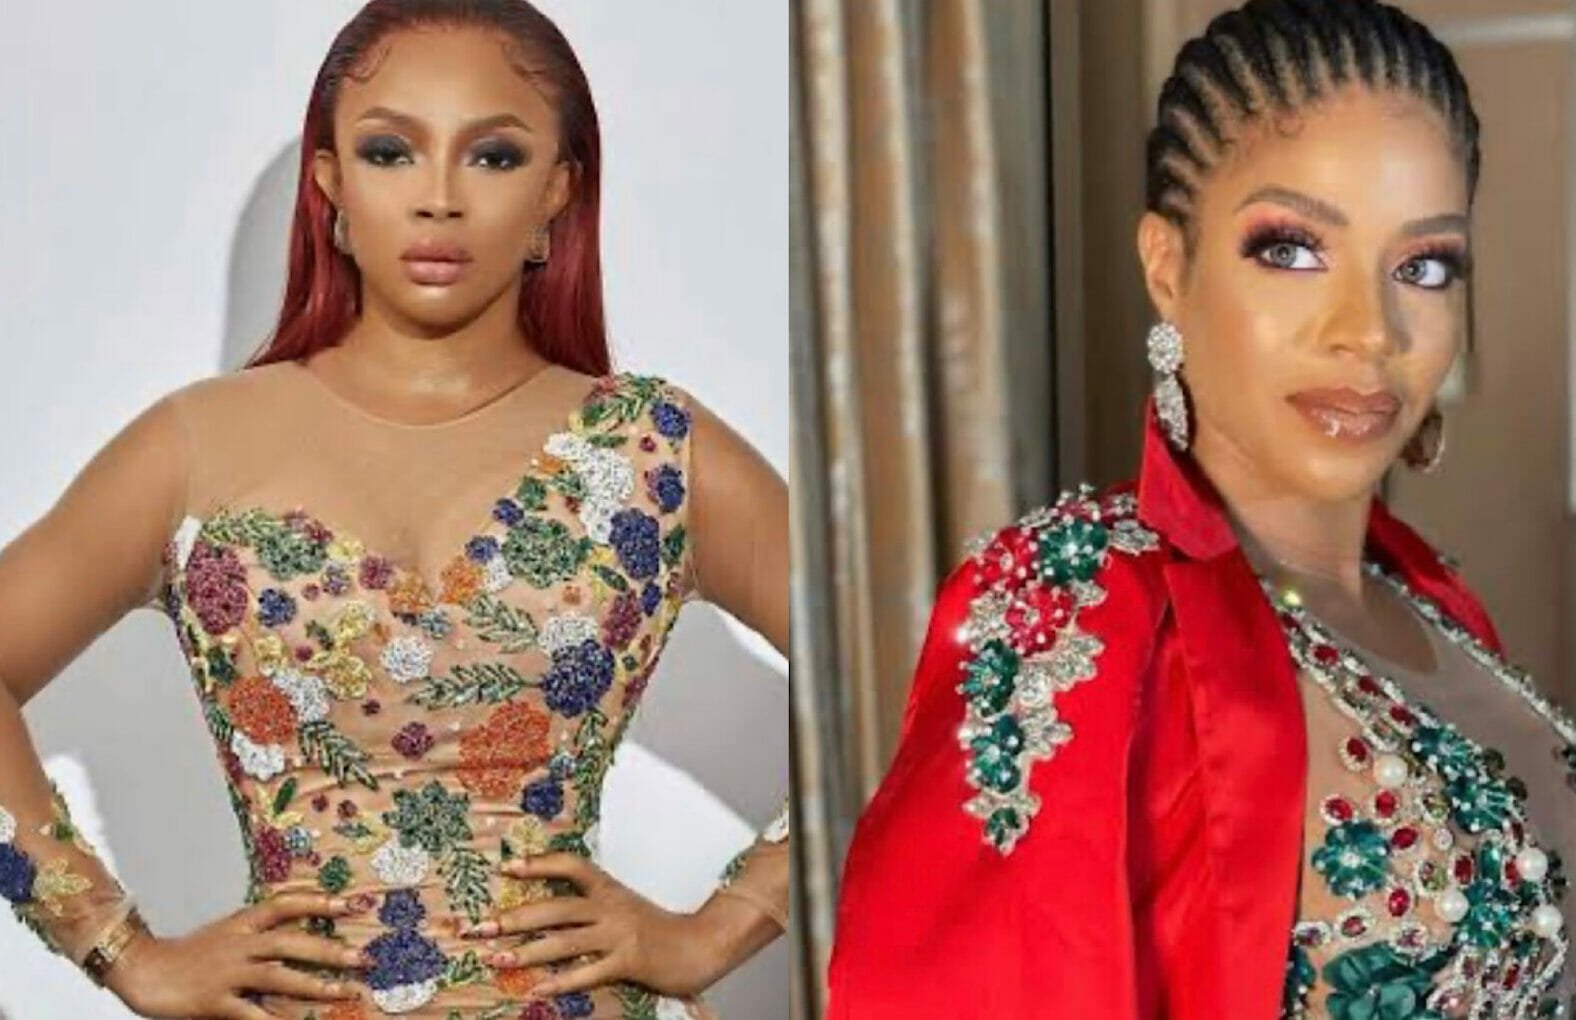 Fans dig out old comments of Benita trolling Toke Makinwa